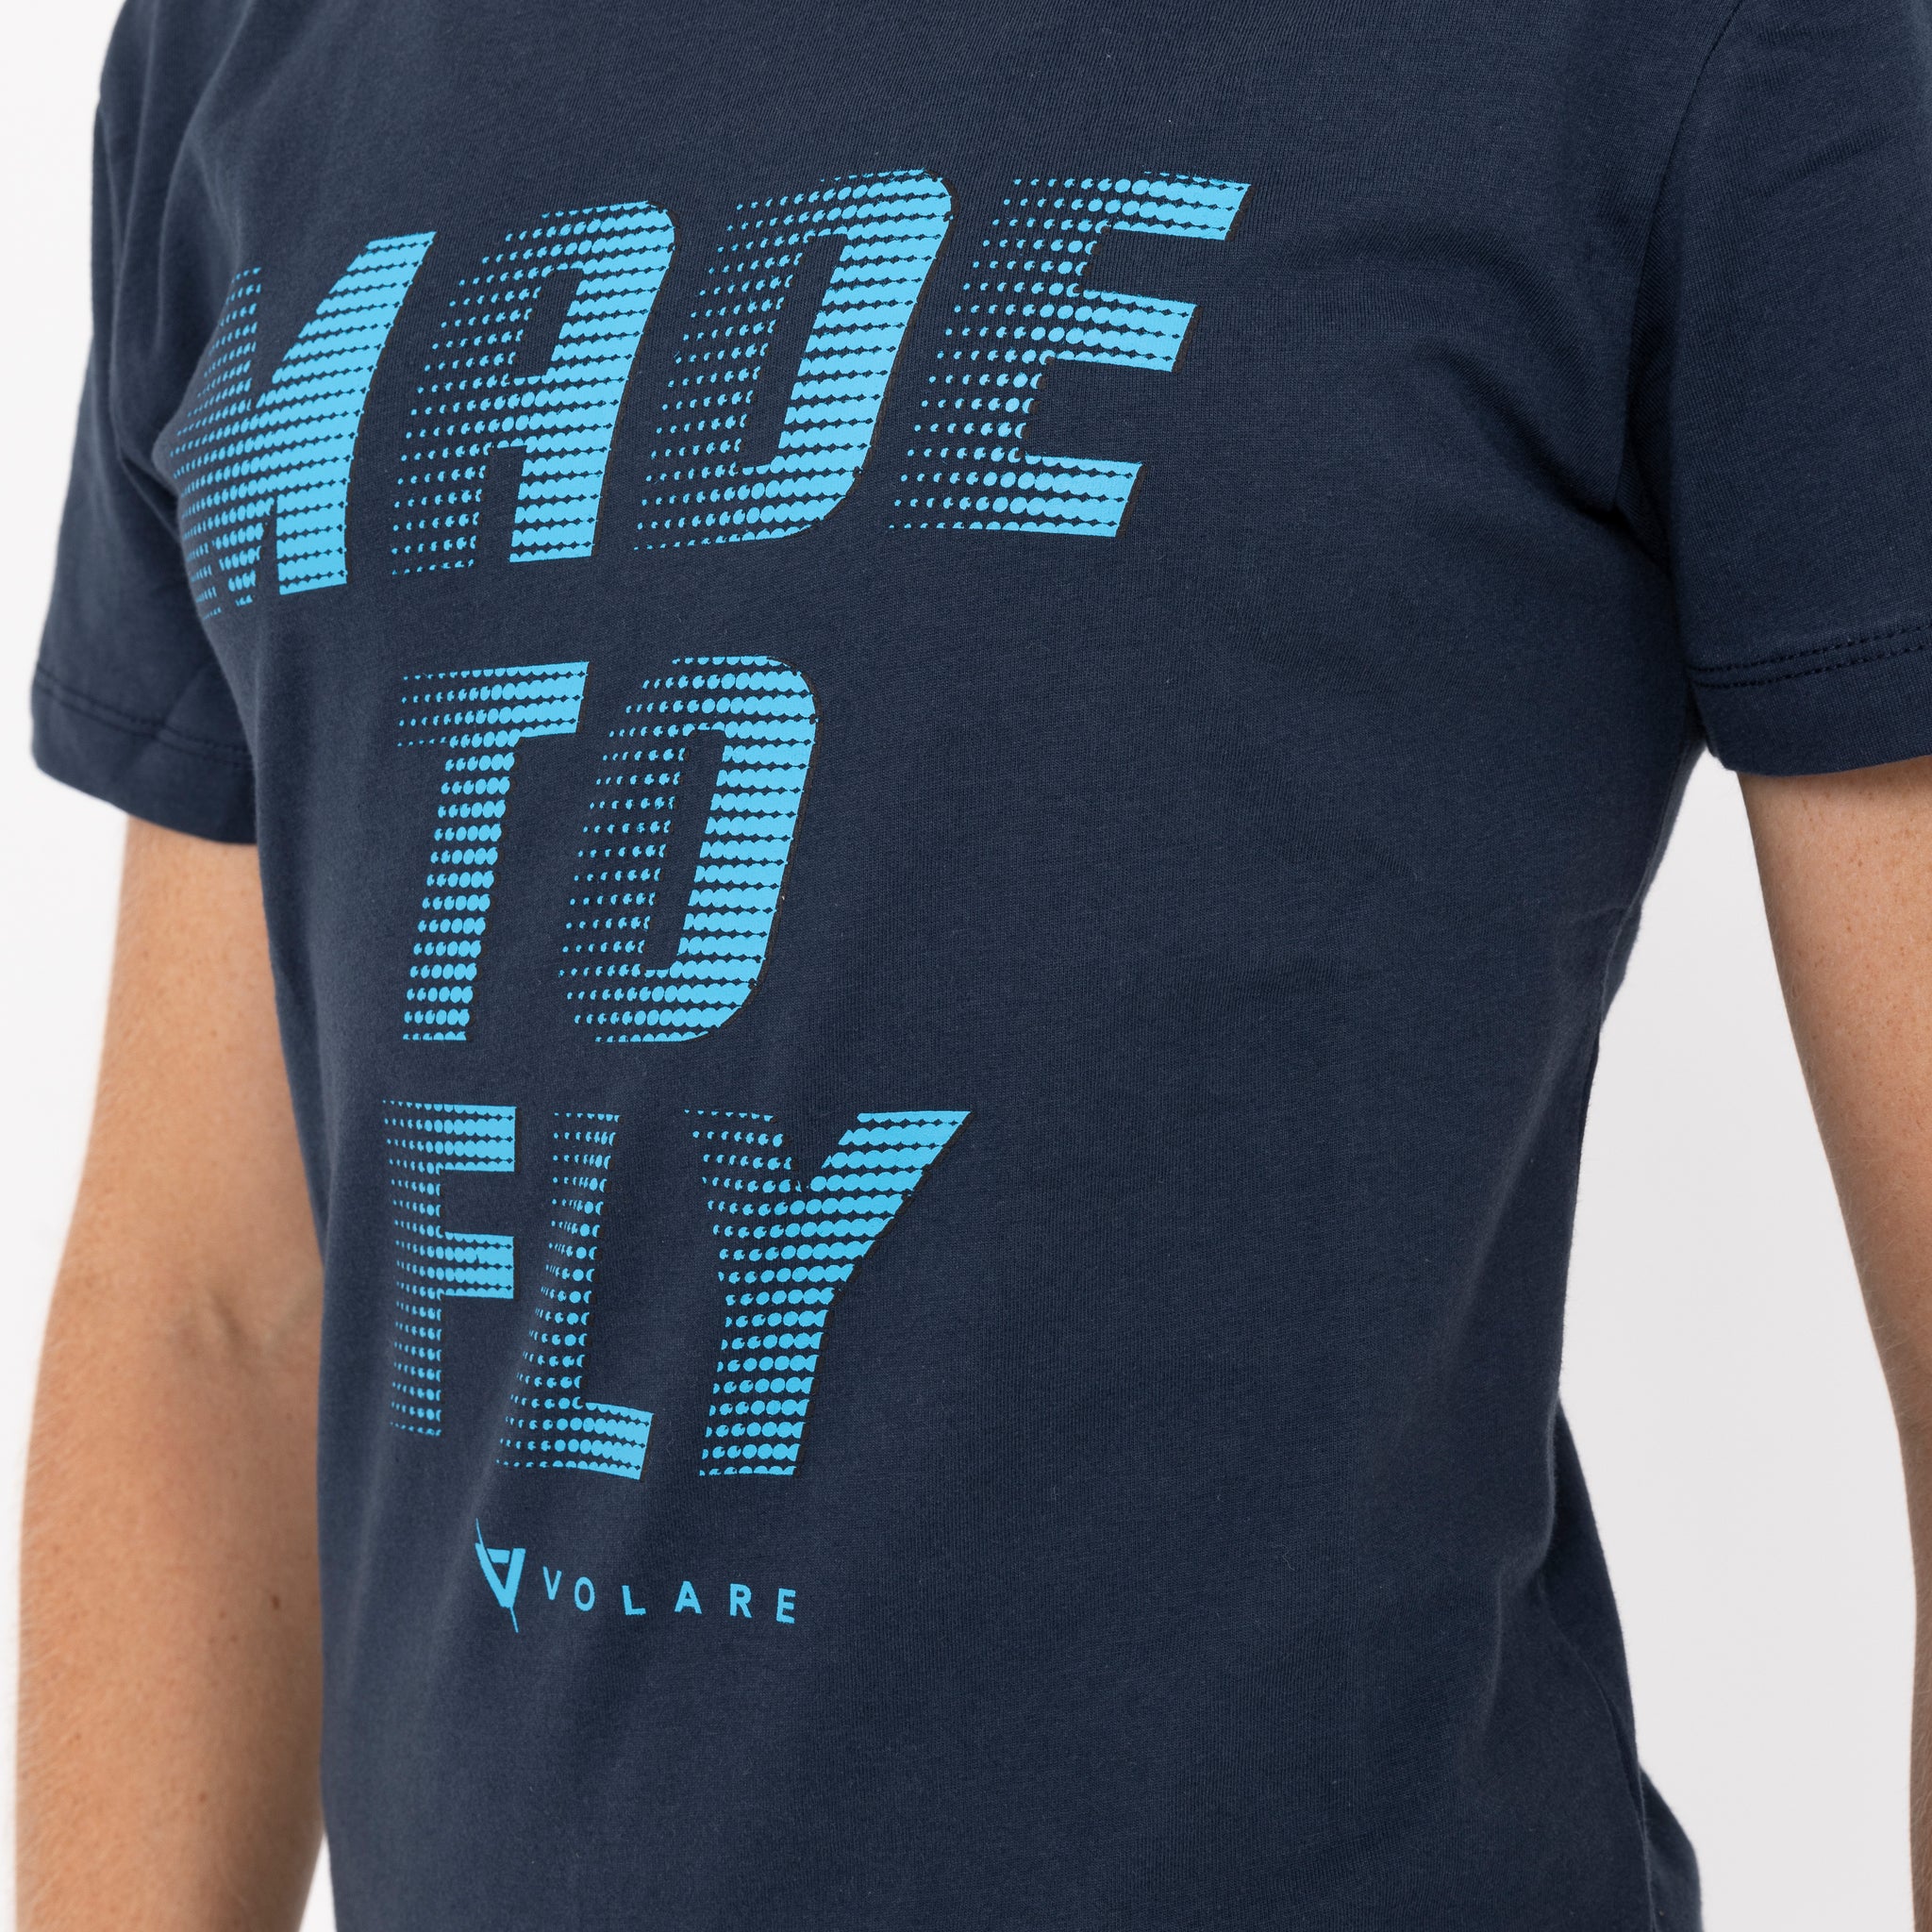 MADE TO FLY T-SHIRT - UNISEX